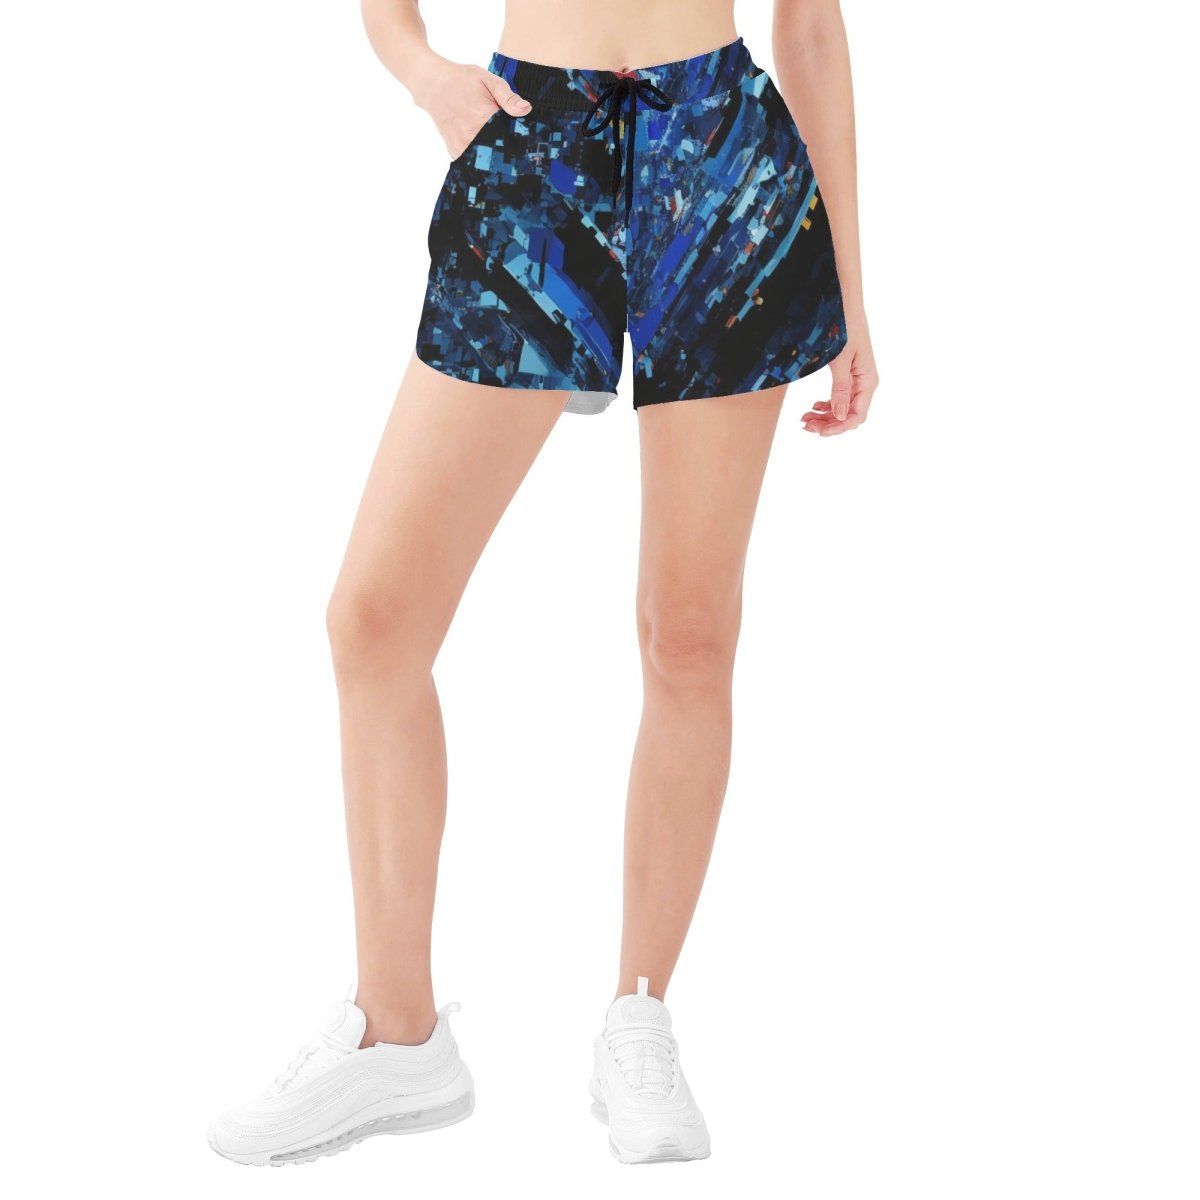 Womens All Over Print Blue Crystal Beach Shorts - Casual and Comfy - Iron Phoenix GHG